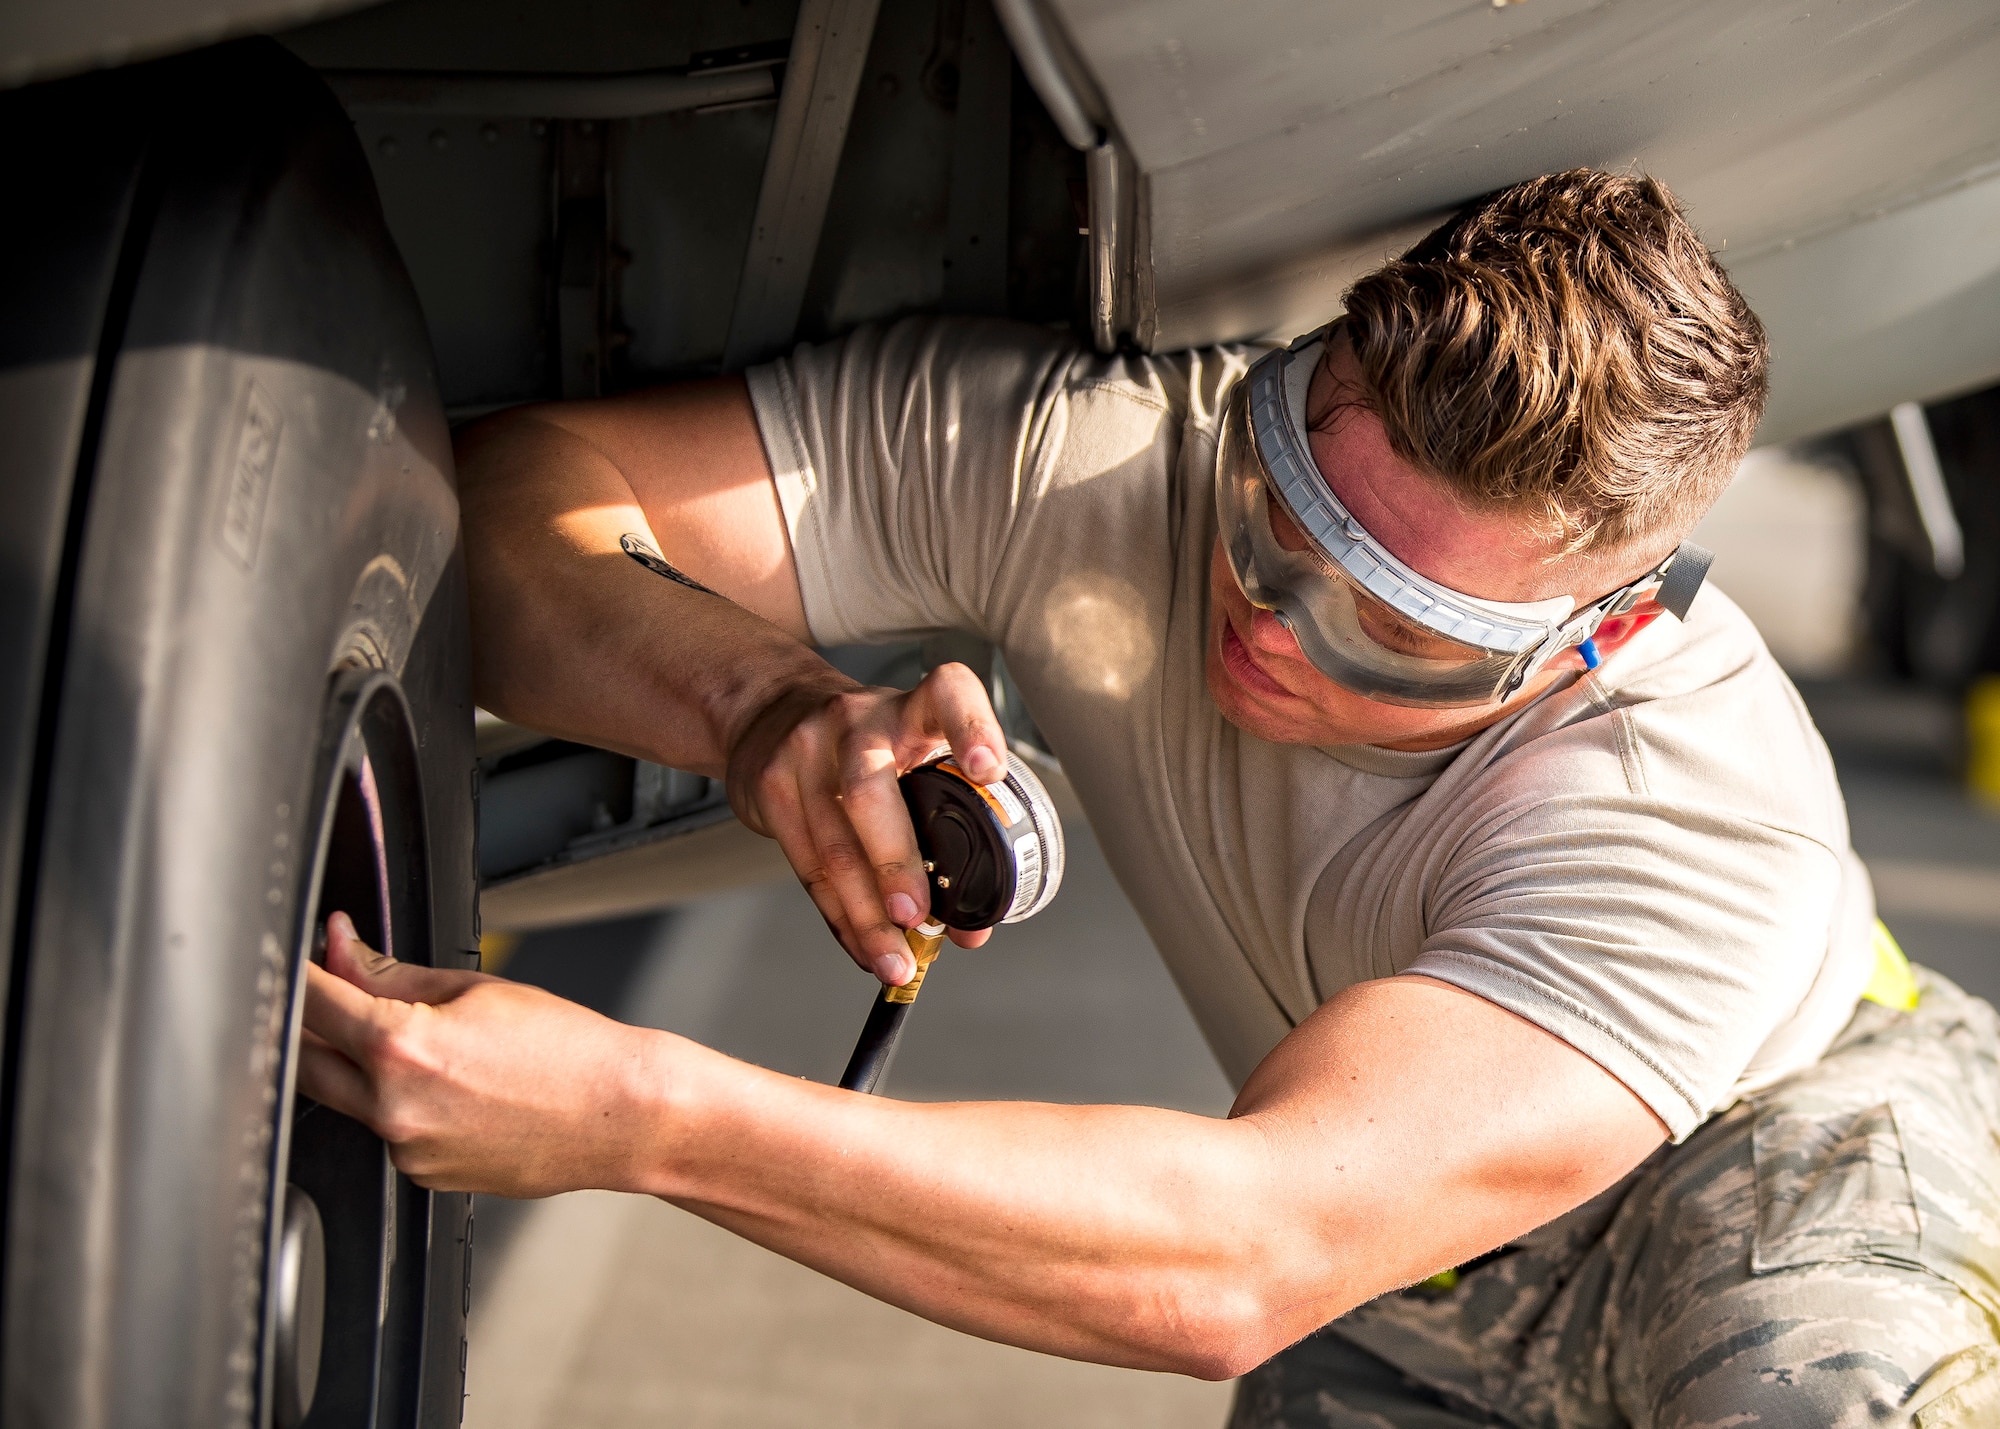 Airman 1st Class Branson Bounds, 71st Aircraft Maintenance Unit (AMU) crew chief, checks the pressure for a tire on an HC-130J Combat King II, Aug. 13, 2019, at Moody Air Force Base, Ga. Airmen from the 71st AMU perform various tasks prior to take off to ensure the aircraft is performing optimally to complete its mission of supporting the 71st Rescue Squadron. Those tasks consist of: pre-flight inspection, removing plugs and cover, repairing any problems found during crew pre-flight checks as well as marshaling the aircraft for takeoff. (U.S. Air Force photo by Airman 1st Class Eugene Oliver)